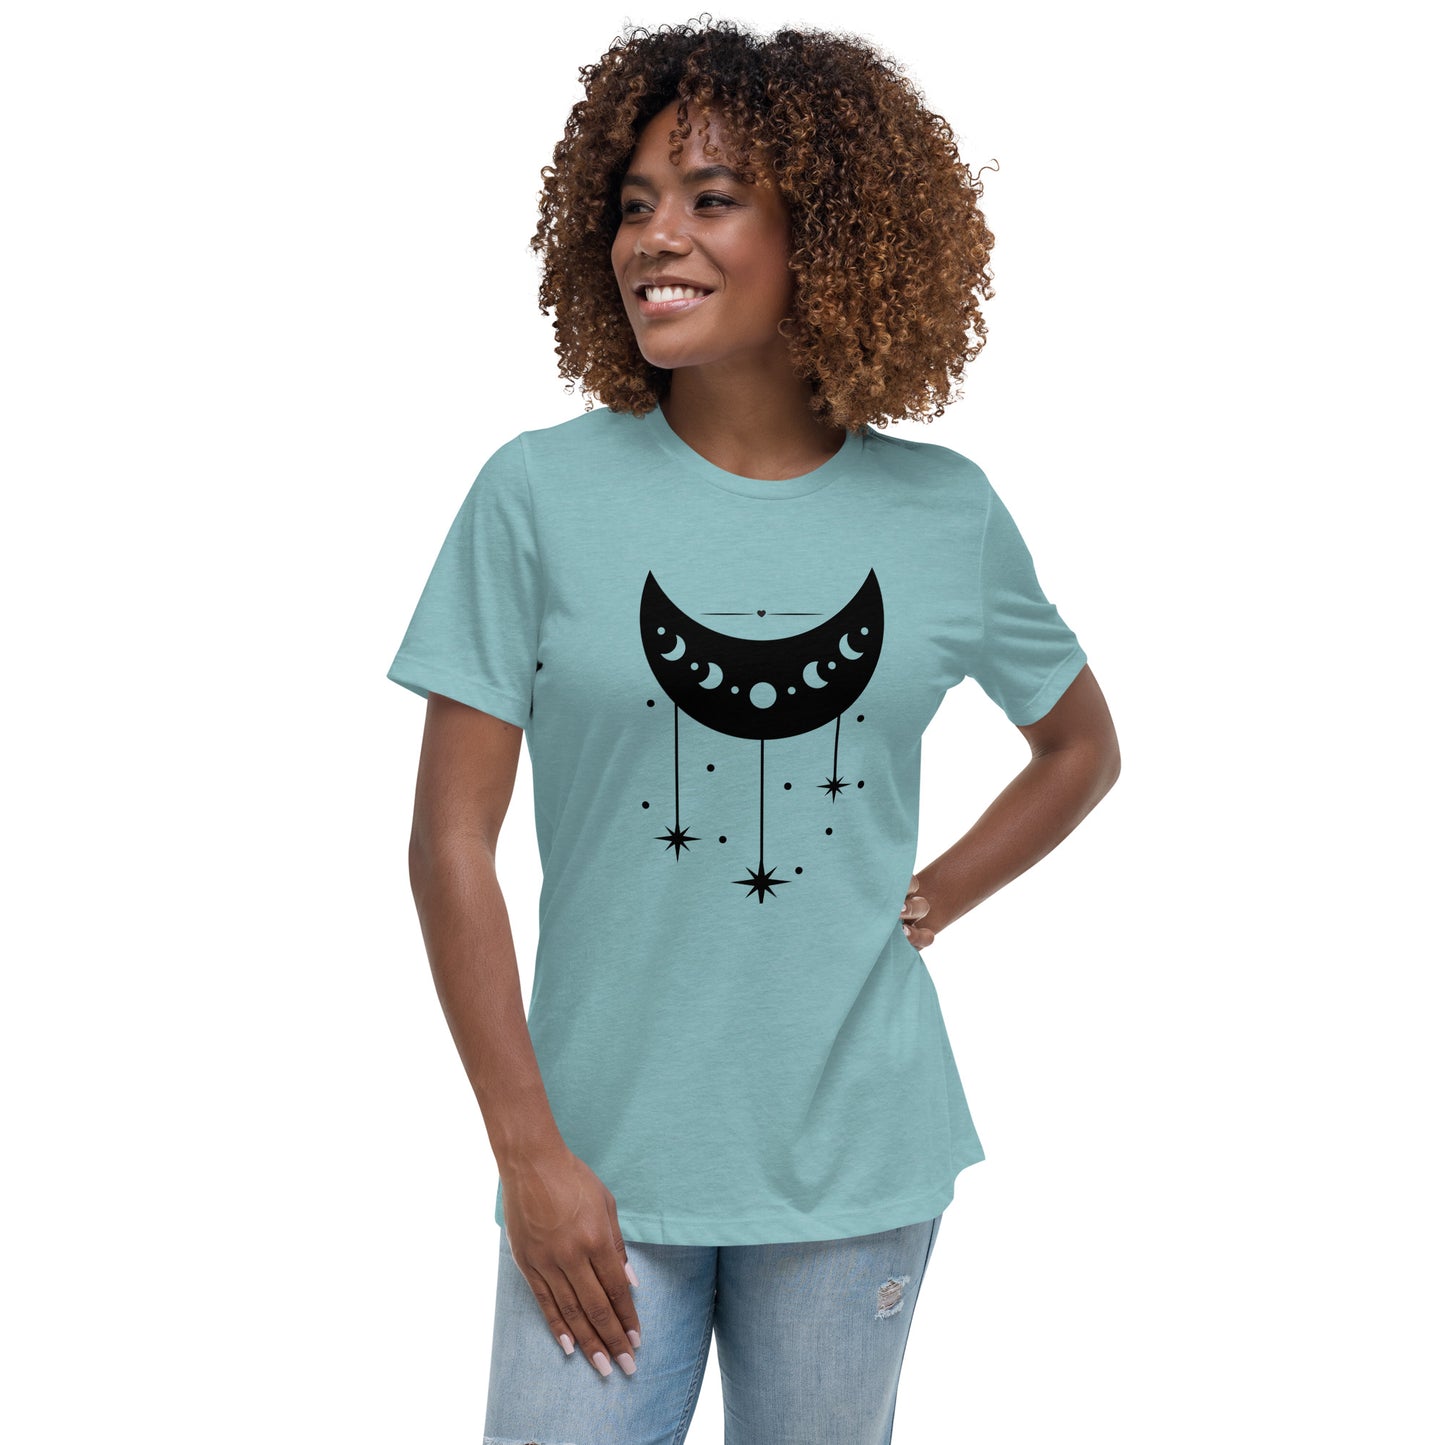 Moon Phase Women's Relaxed Fit T-Shirt